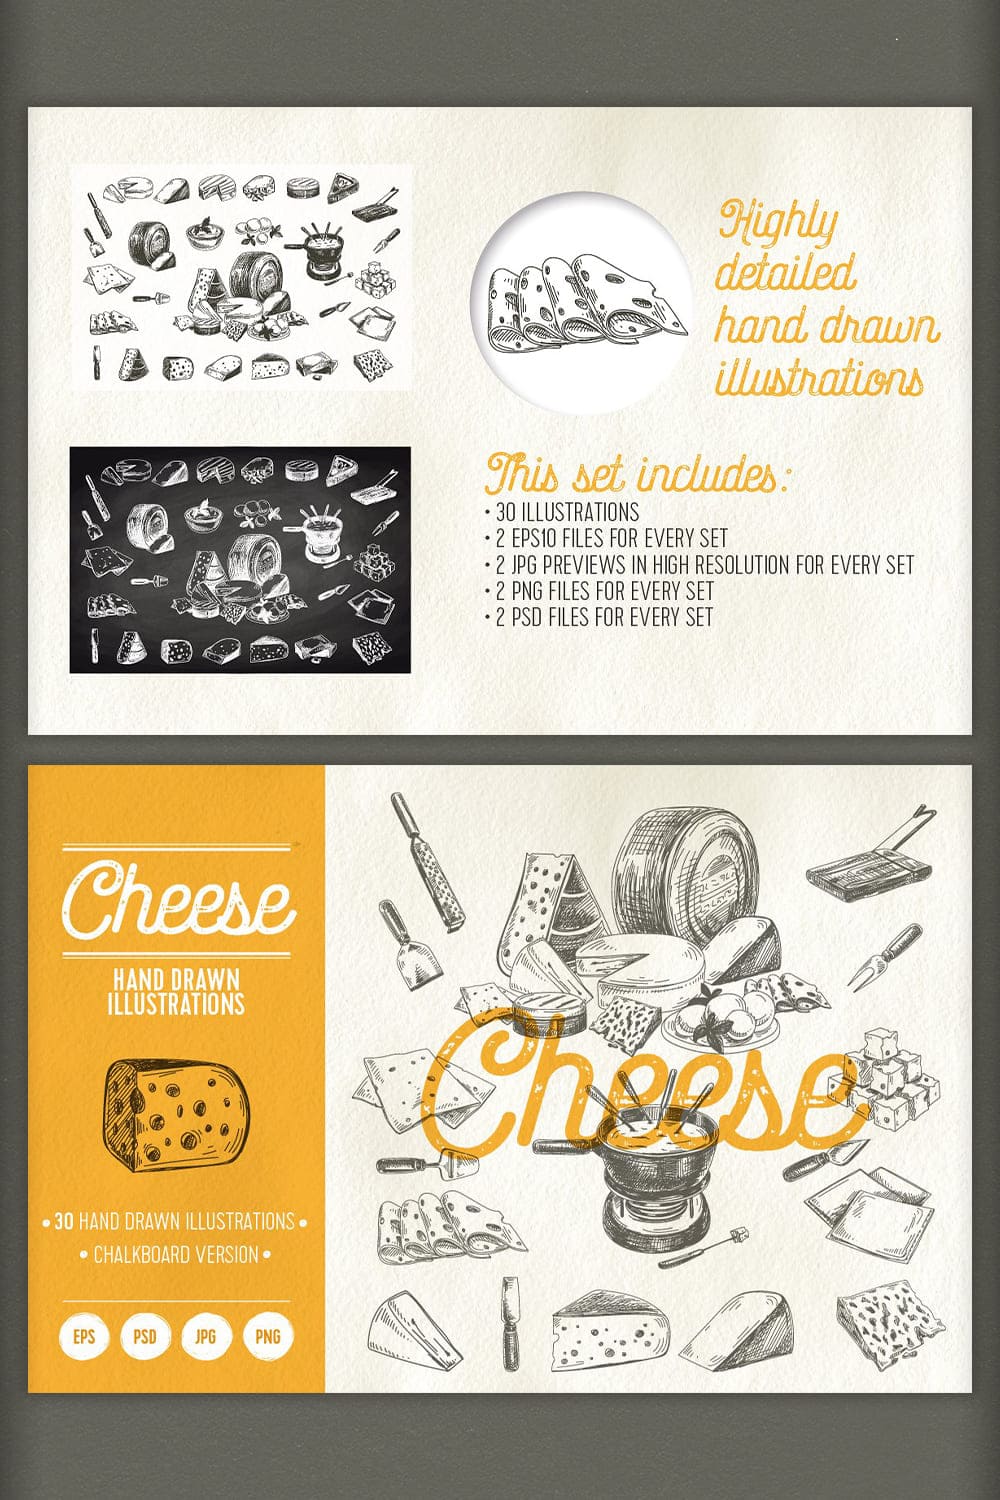 Cheese, Highly Detailed Hand Drawn Illustrations.